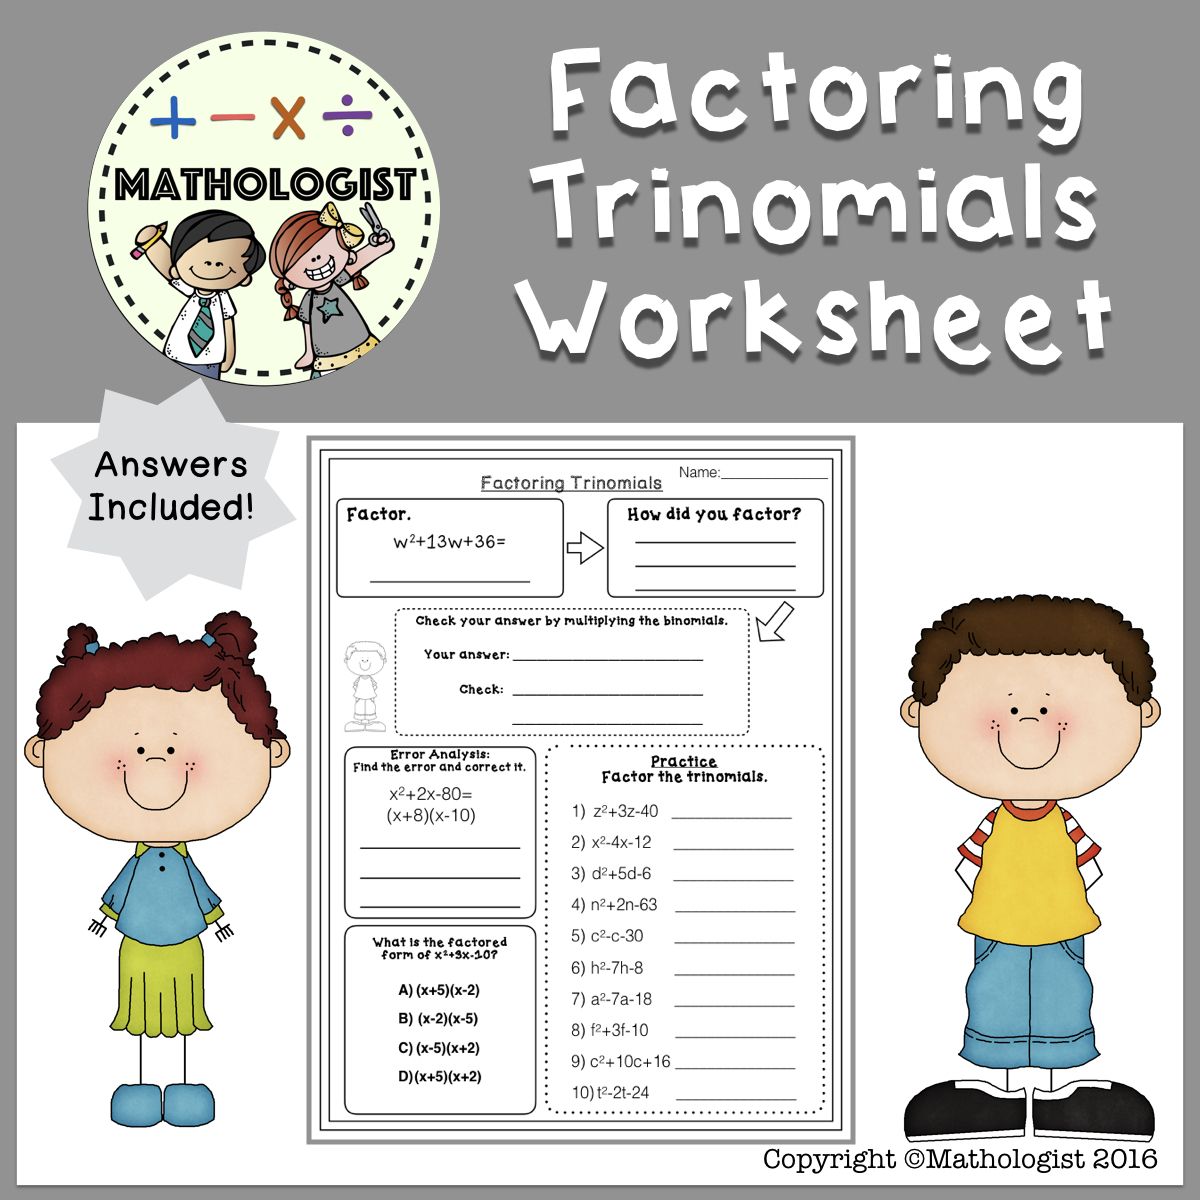 Factoring Trinomials Worksheet Answers With Work